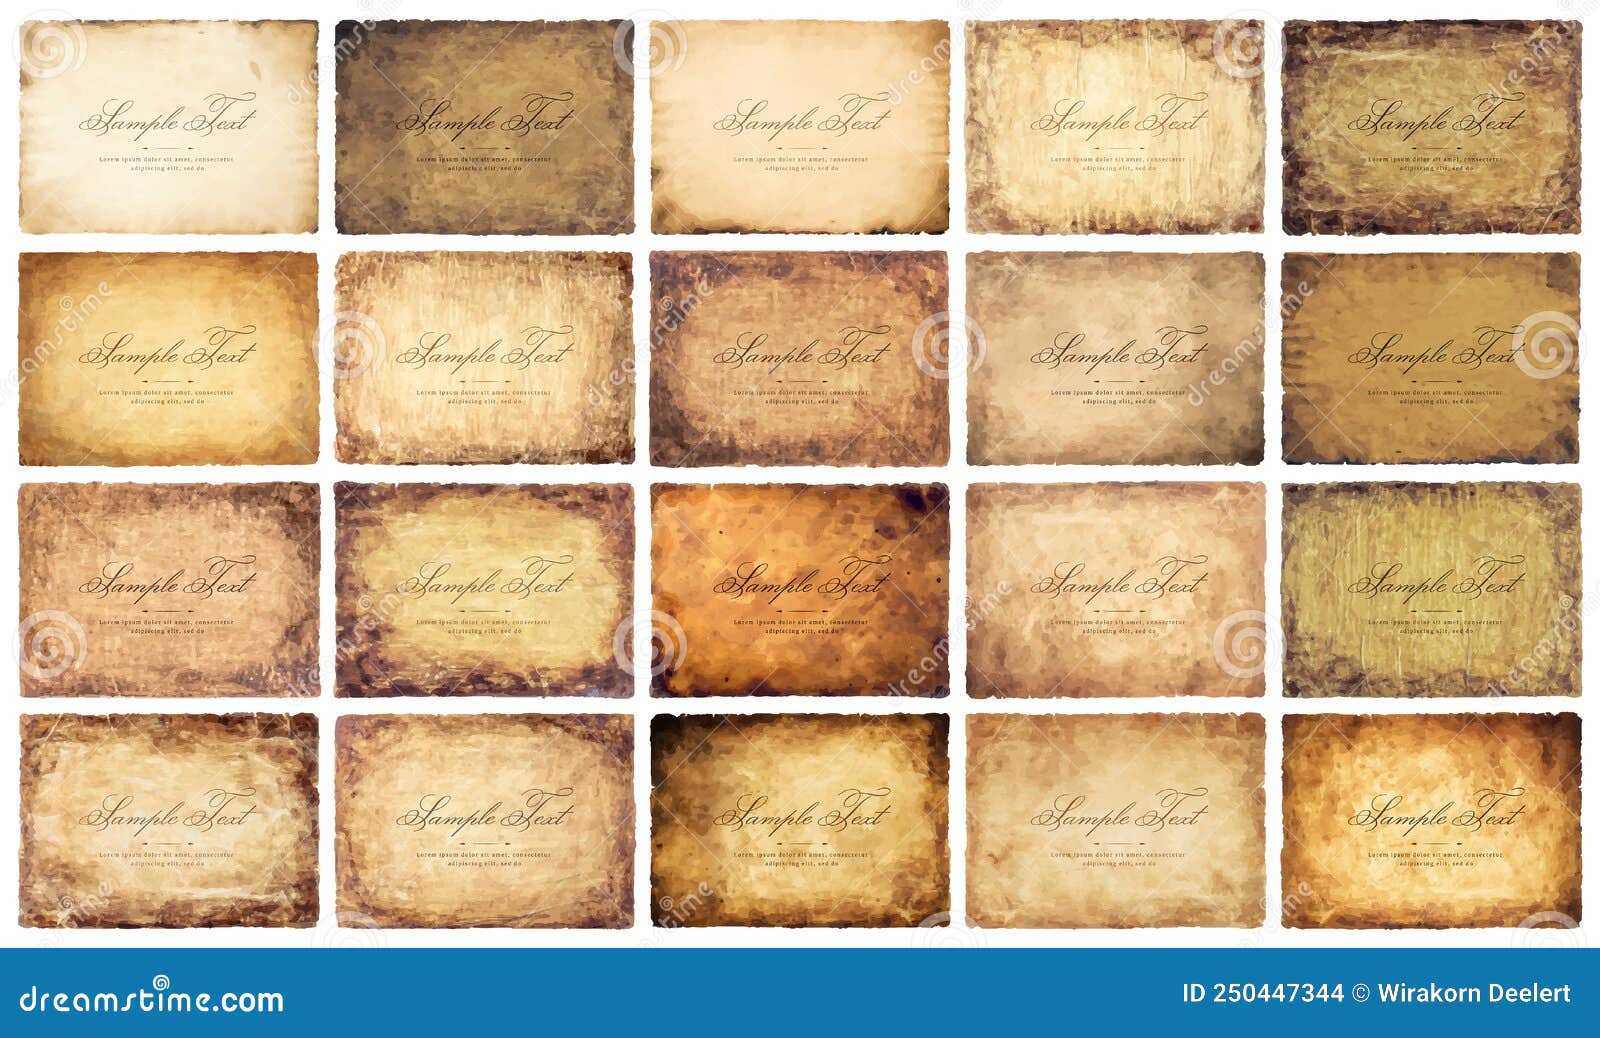 https://thumbs.dreamstime.com/z/collection-set-old-parchment-paper-sheet-vintage-aged-texture-isolated-white-background-250447344.jpg